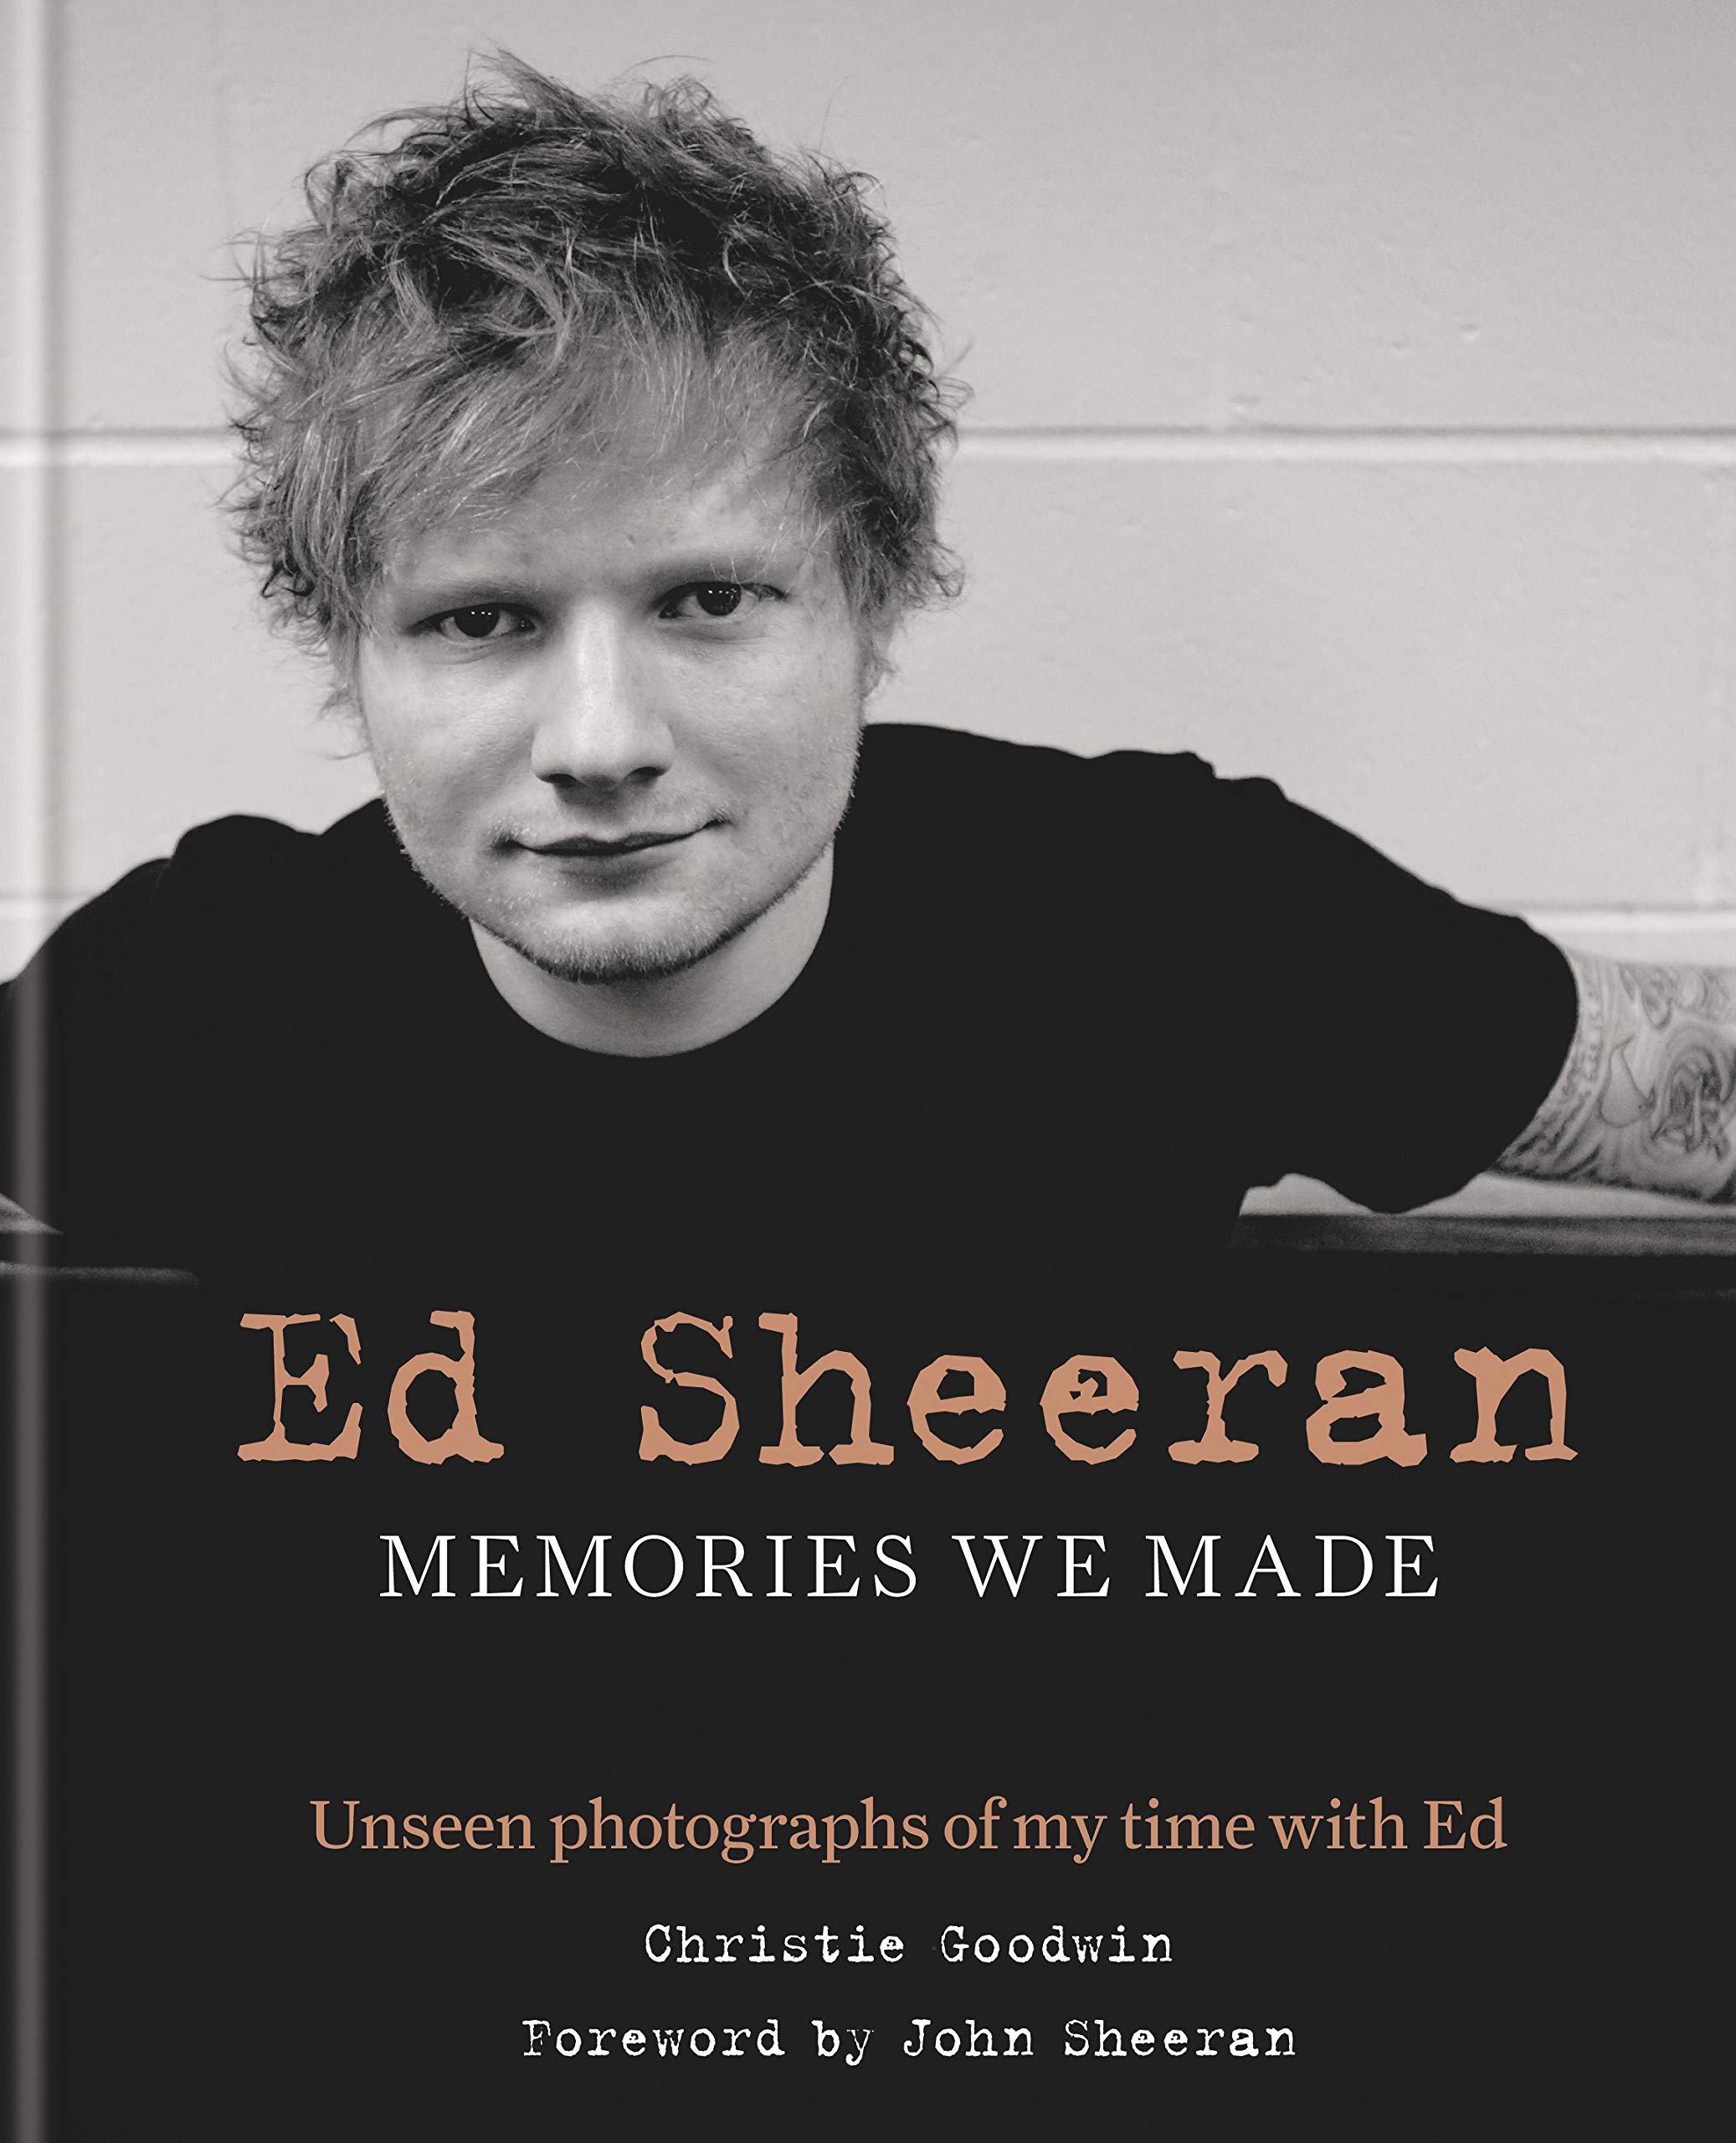 Tear of Christie Goodwin's portrait of Ed Sheeran on the cover of her book, "Ed Sheeran: memories we made"